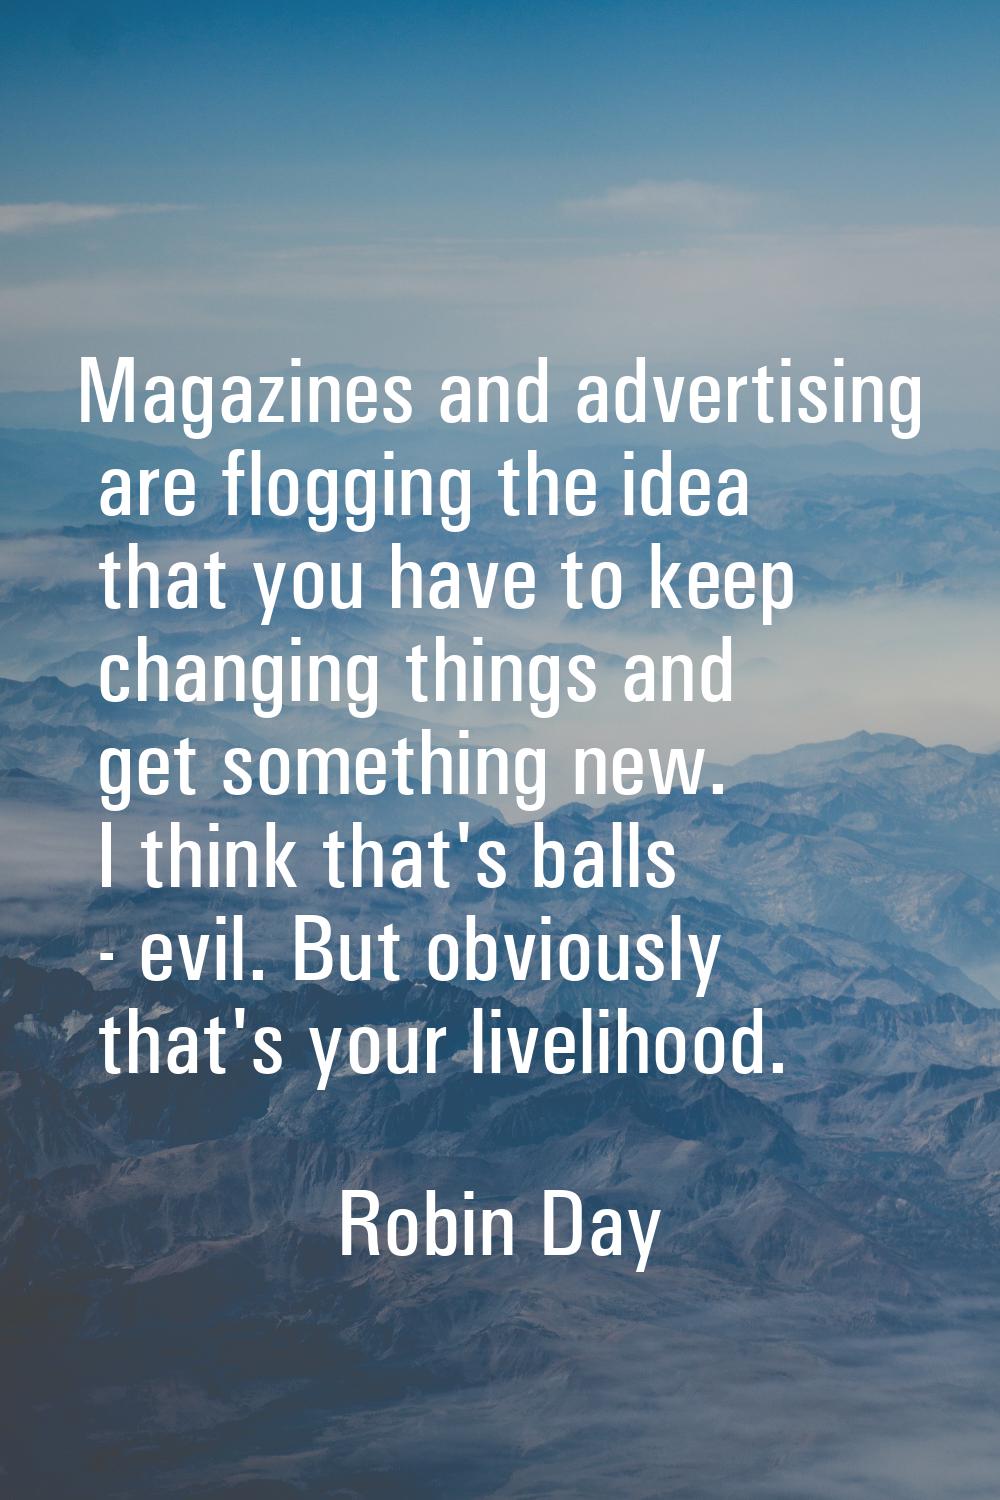 Magazines and advertising are flogging the idea that you have to keep changing things and get somet